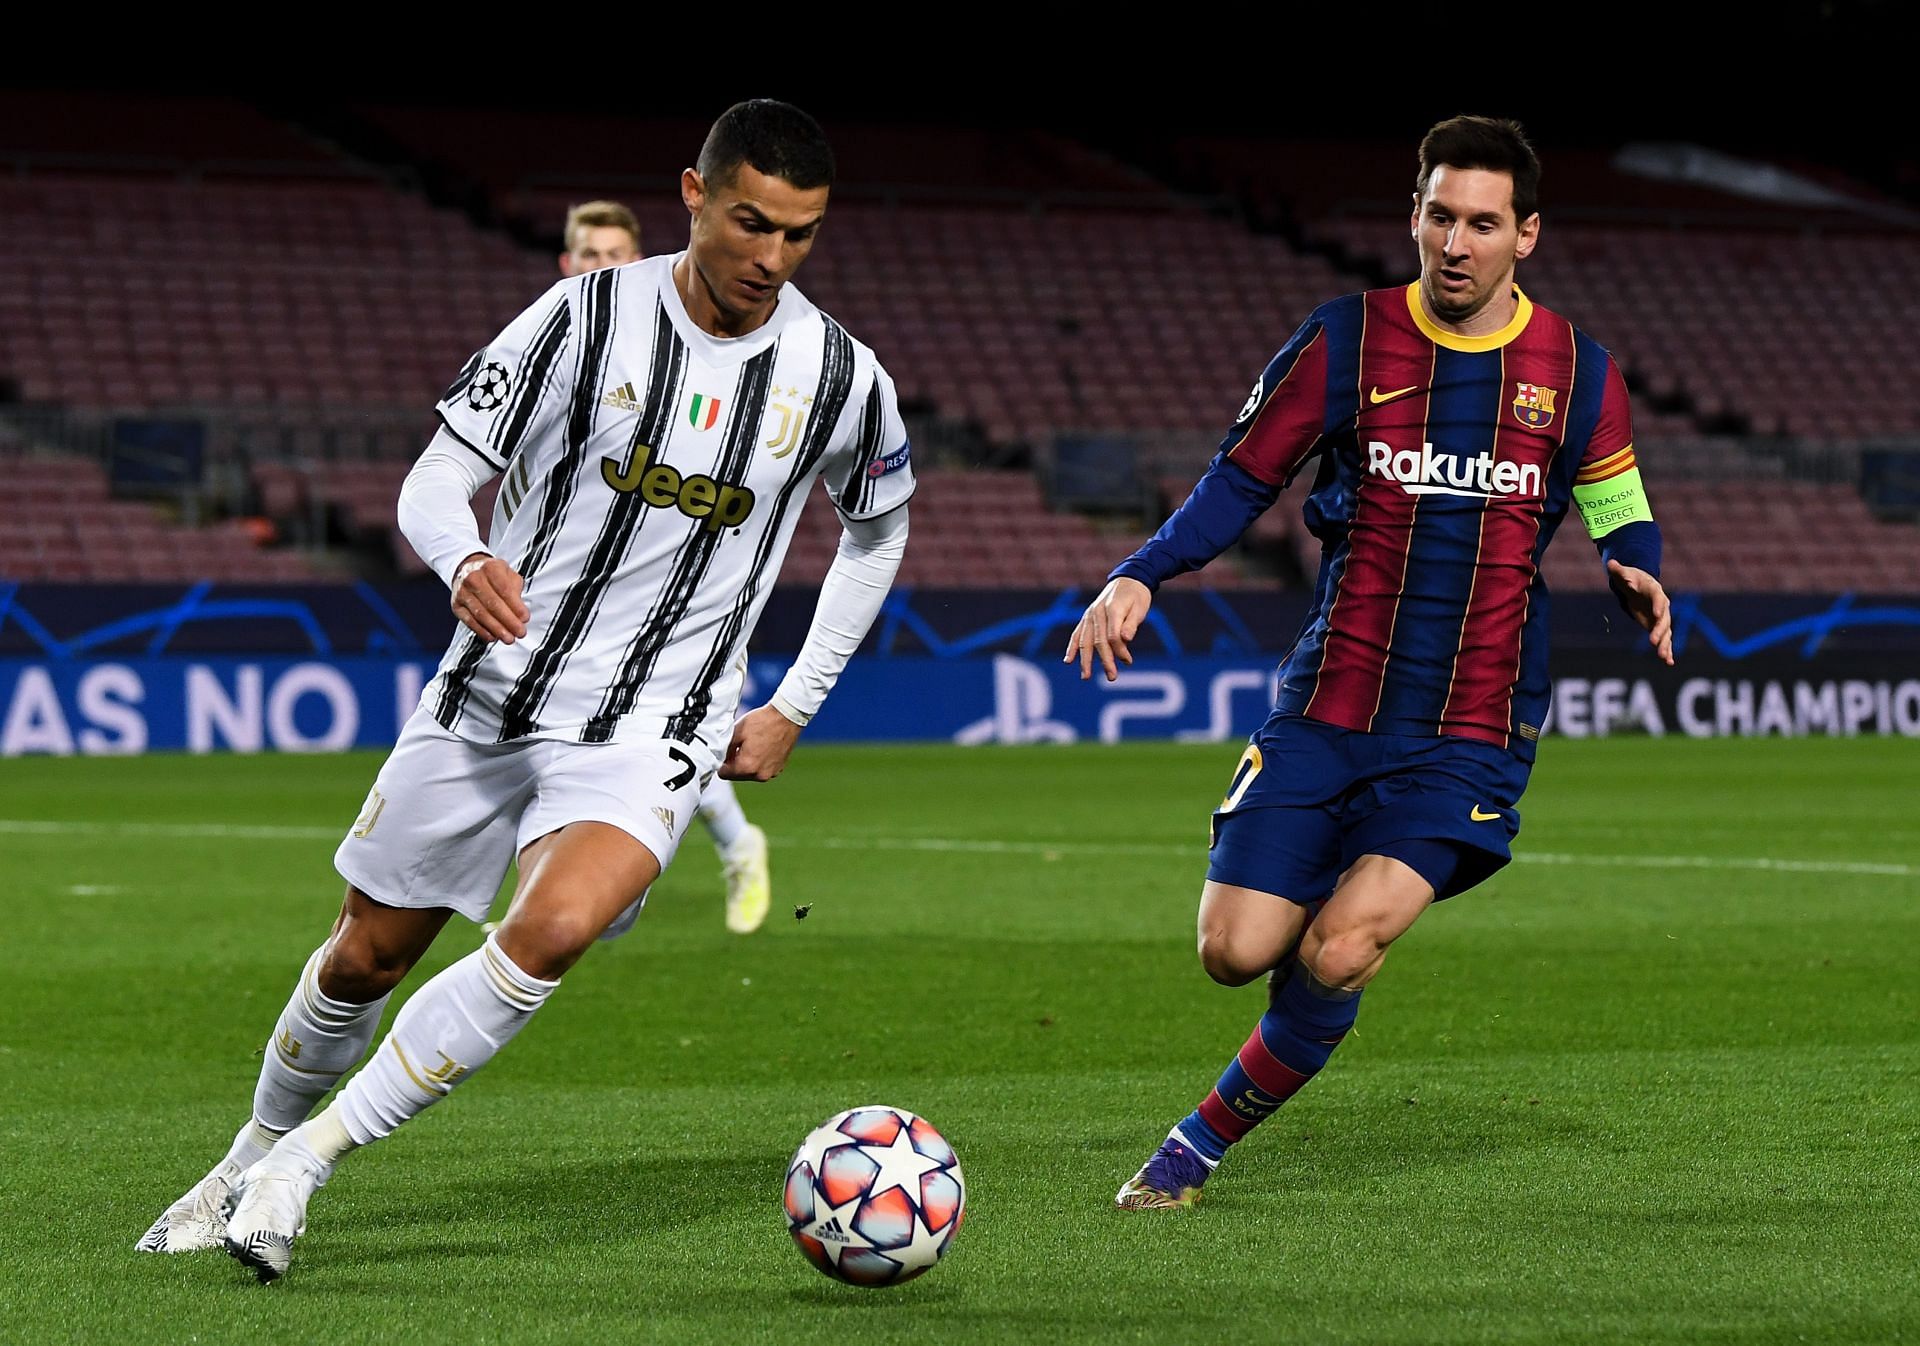 Cristiano Ronaldo (left) and Lionel Messi have been on fire this season.